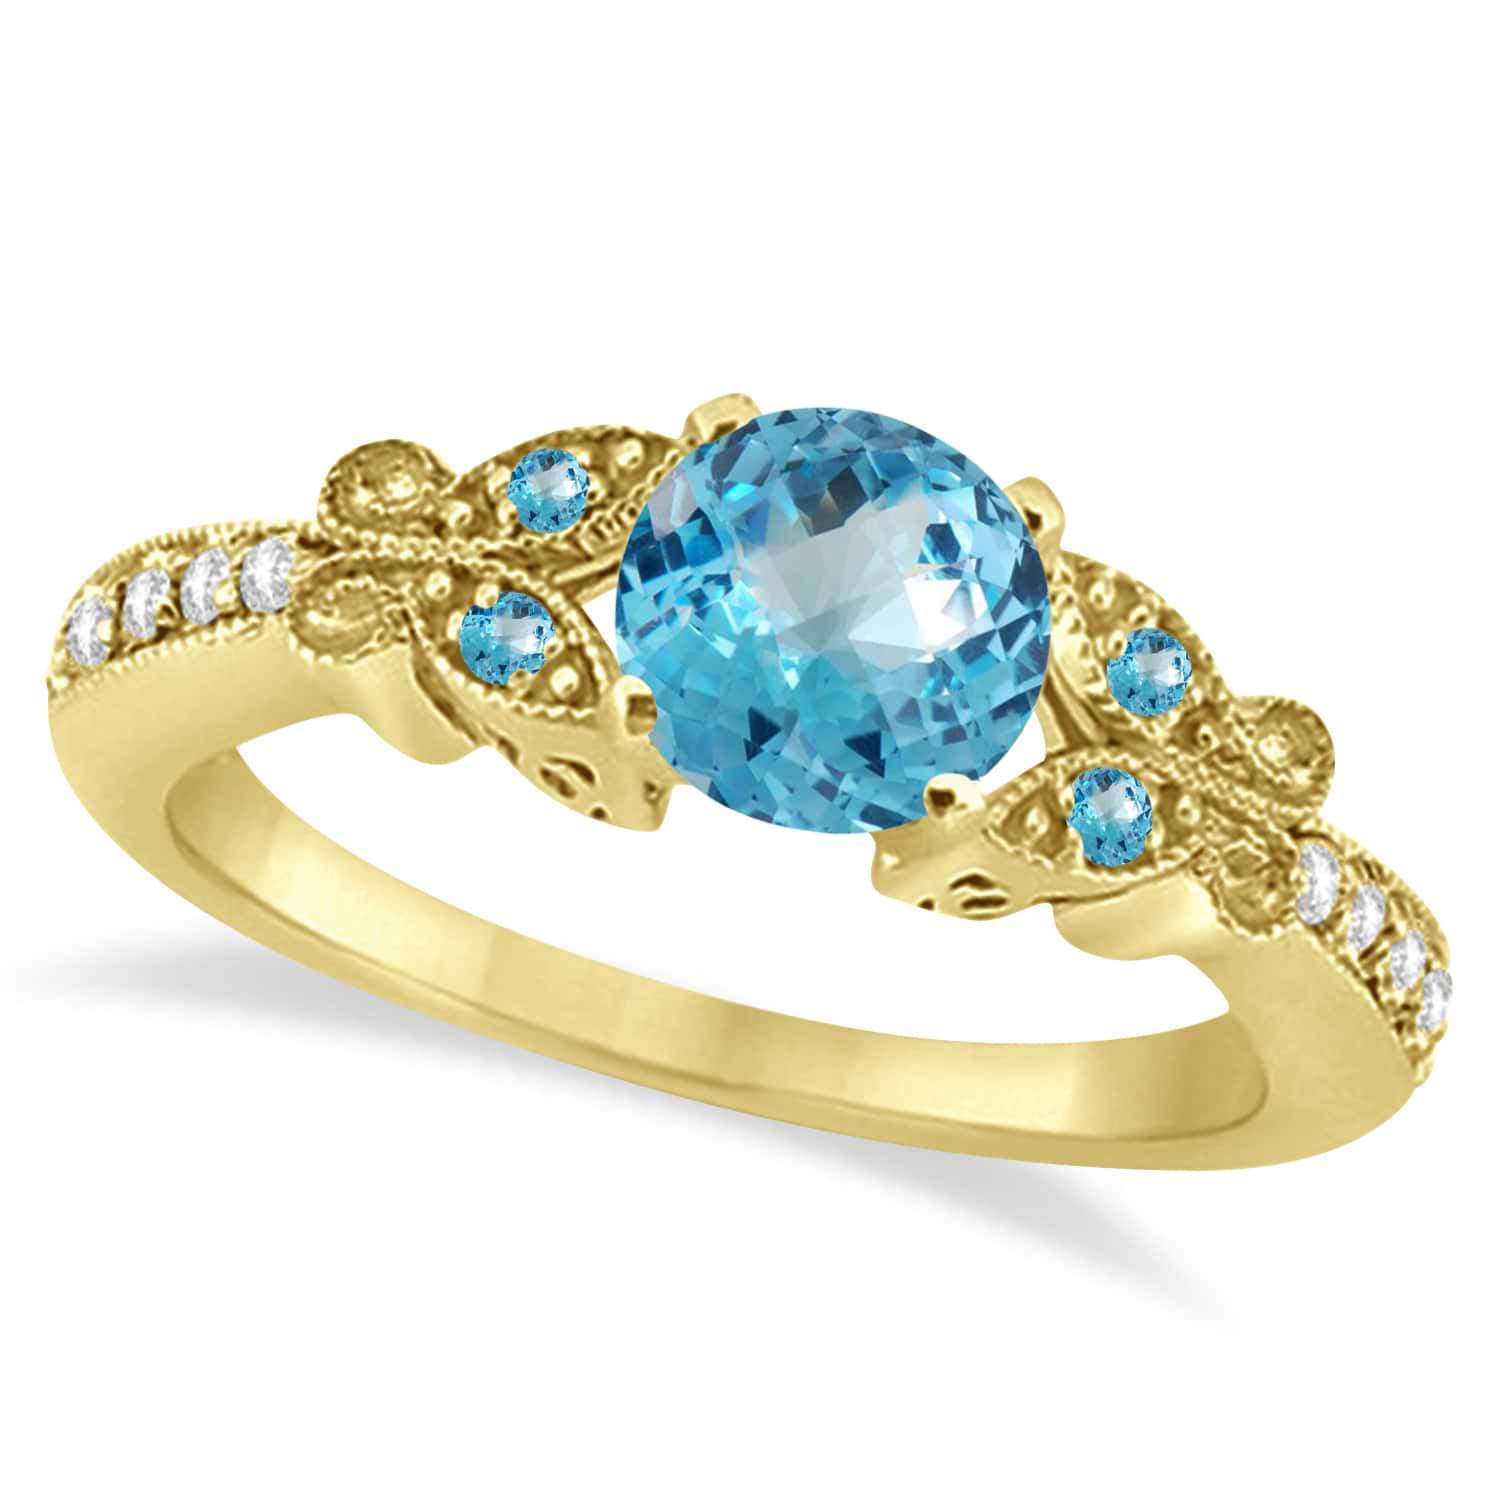 Butterfly Blue Topaz & Diamond Engagement Ring 18K Yellow Gold 0.88ct